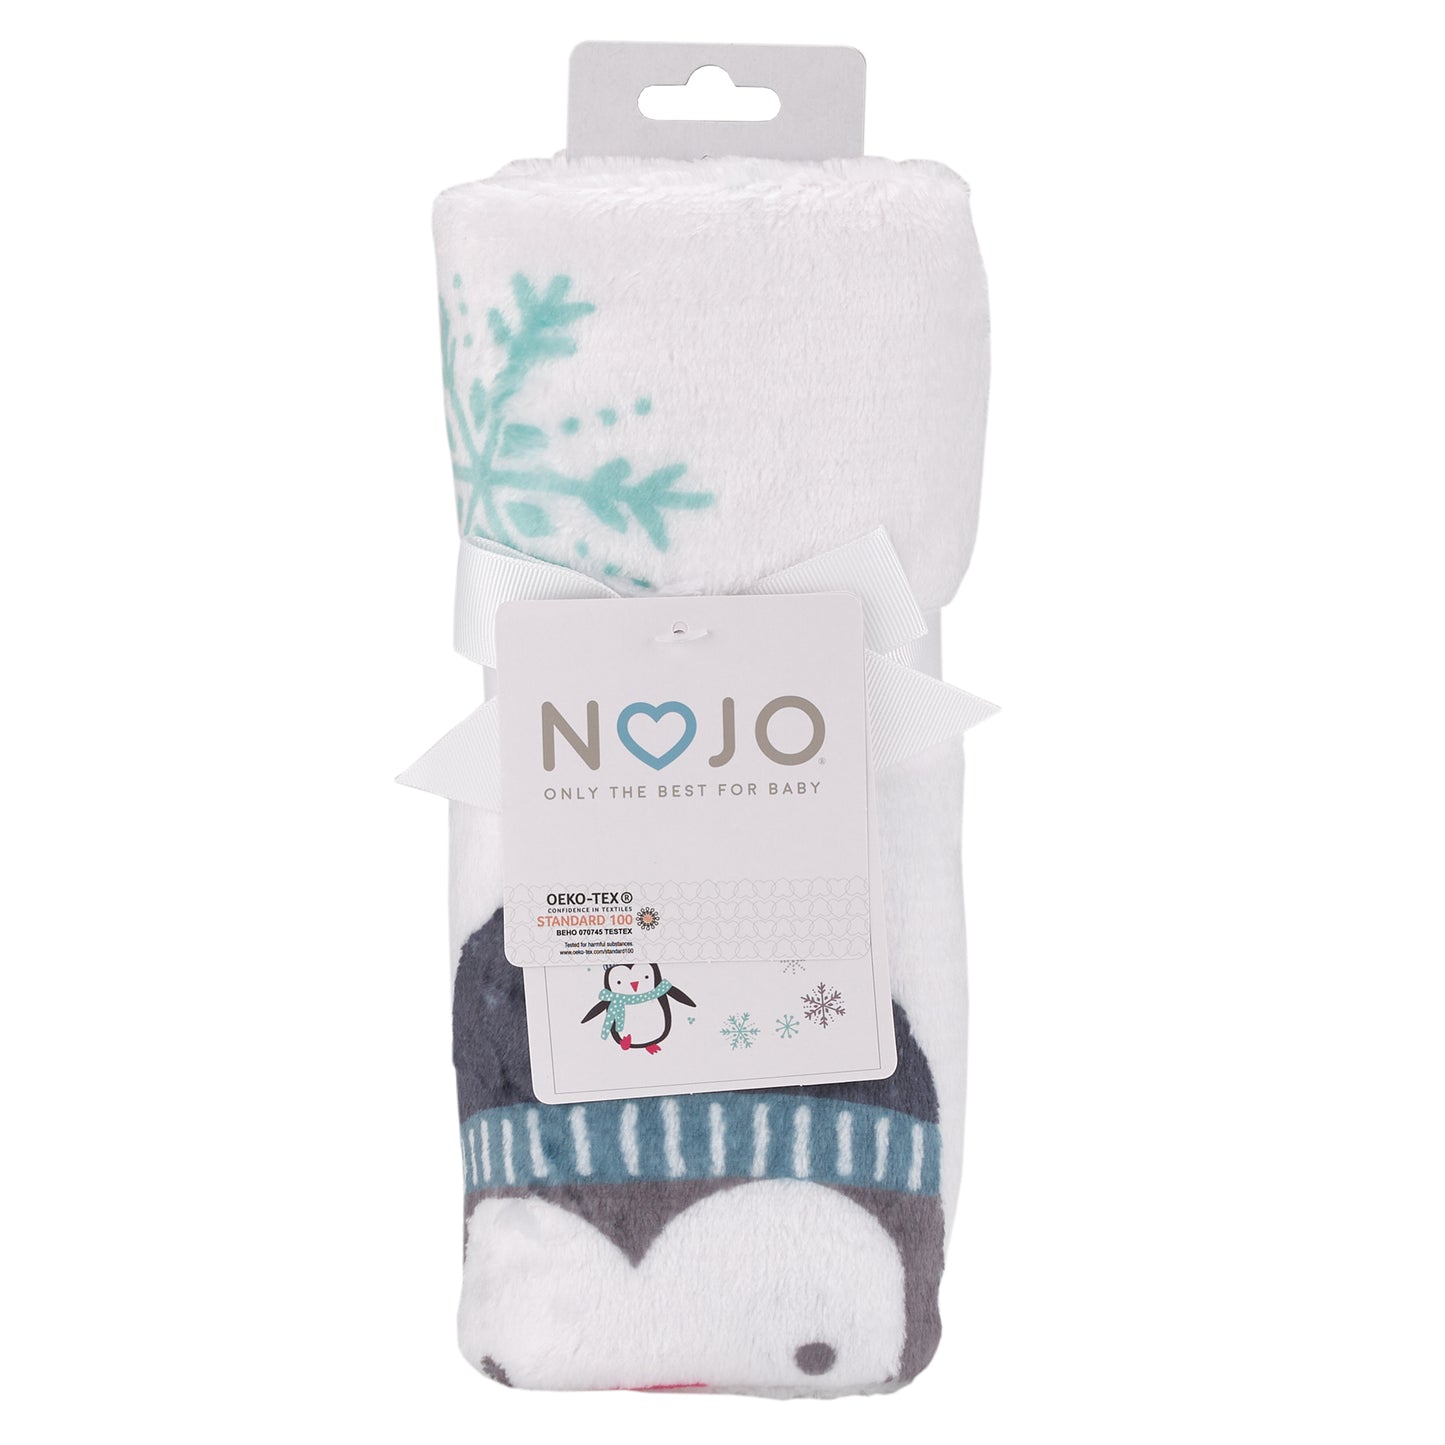 NoJo Penguin White, Aqua, and Gray "Let it Snow" Christmas Photo Op Super Soft Baby Blanket